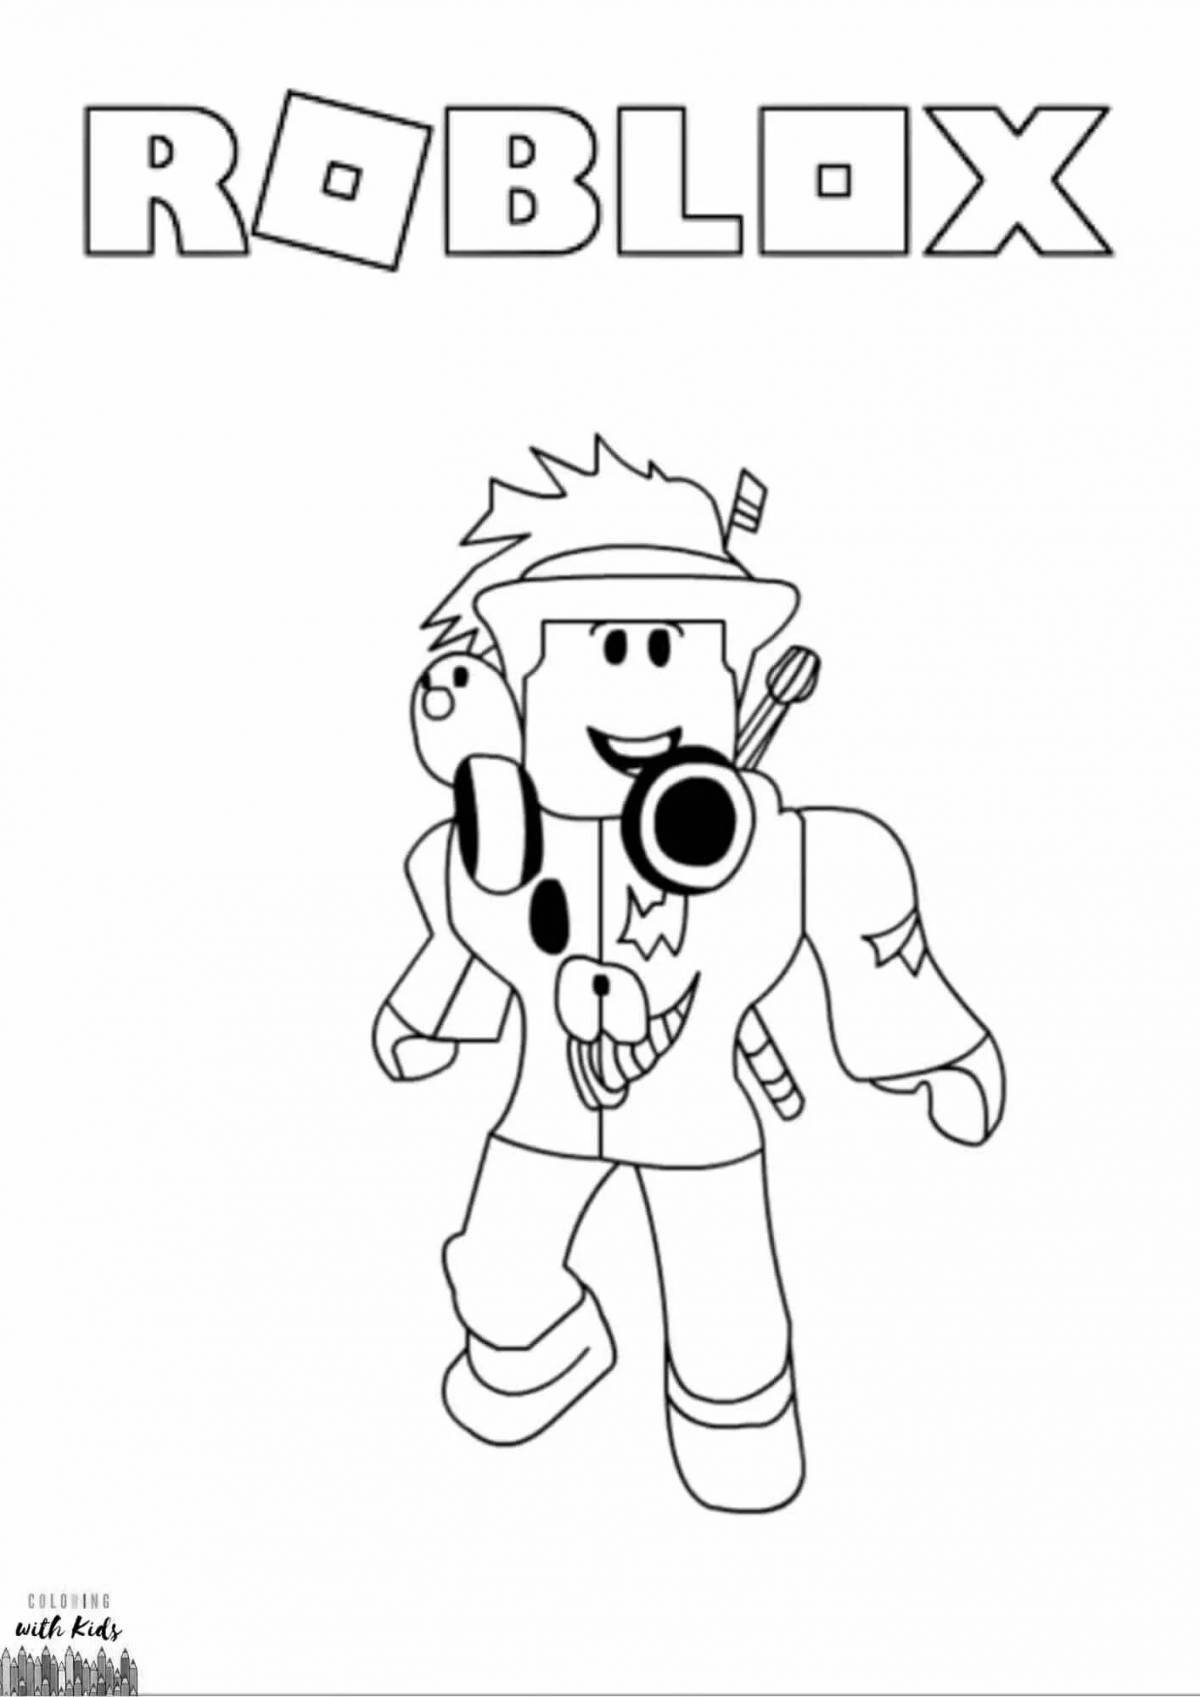 Color-frenzy coloring page robloxers